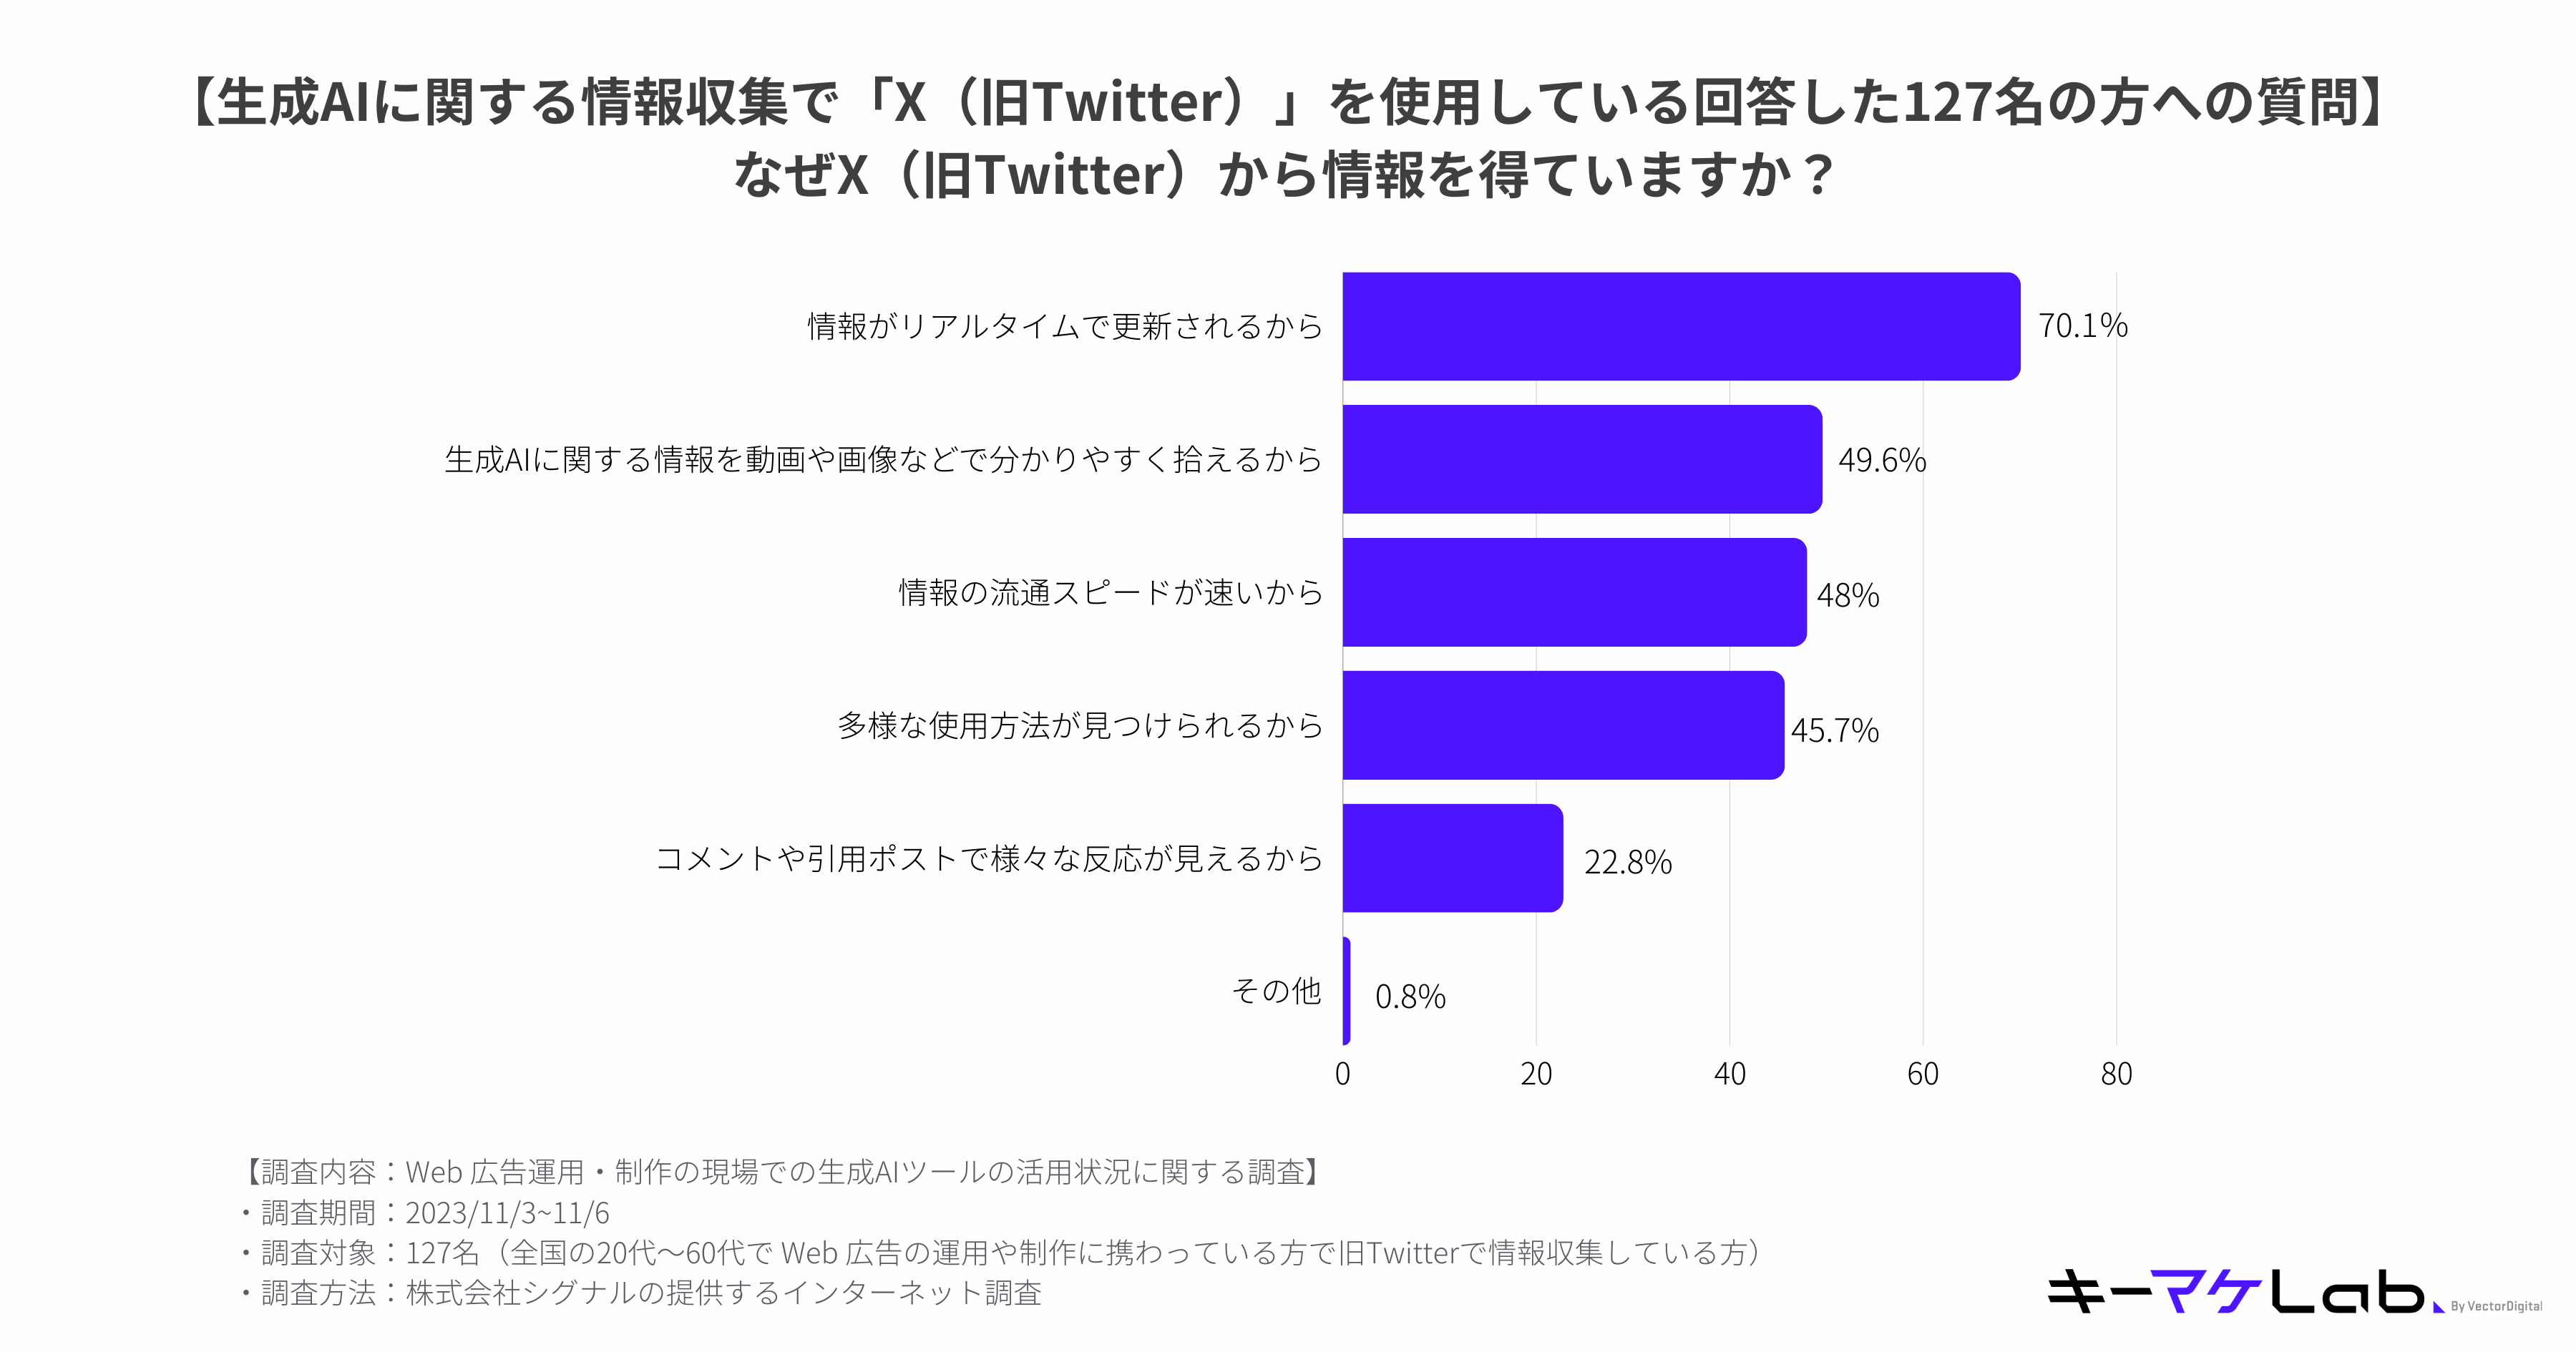 Only those who answered "X (formerly Twitter)" to the question "Q10. Where do you collect information about generated AI tools outside of your company?" were asked "Why do you collect information from X (formerly Twitter)?" When asked, 70.1% said, ``Because the information is updated in real time.'' The next most popular answer, 49.6%, was ``Because I can easily get information about generative AI through videos and images.'' 48% said "Because the speed of information flow is fast."